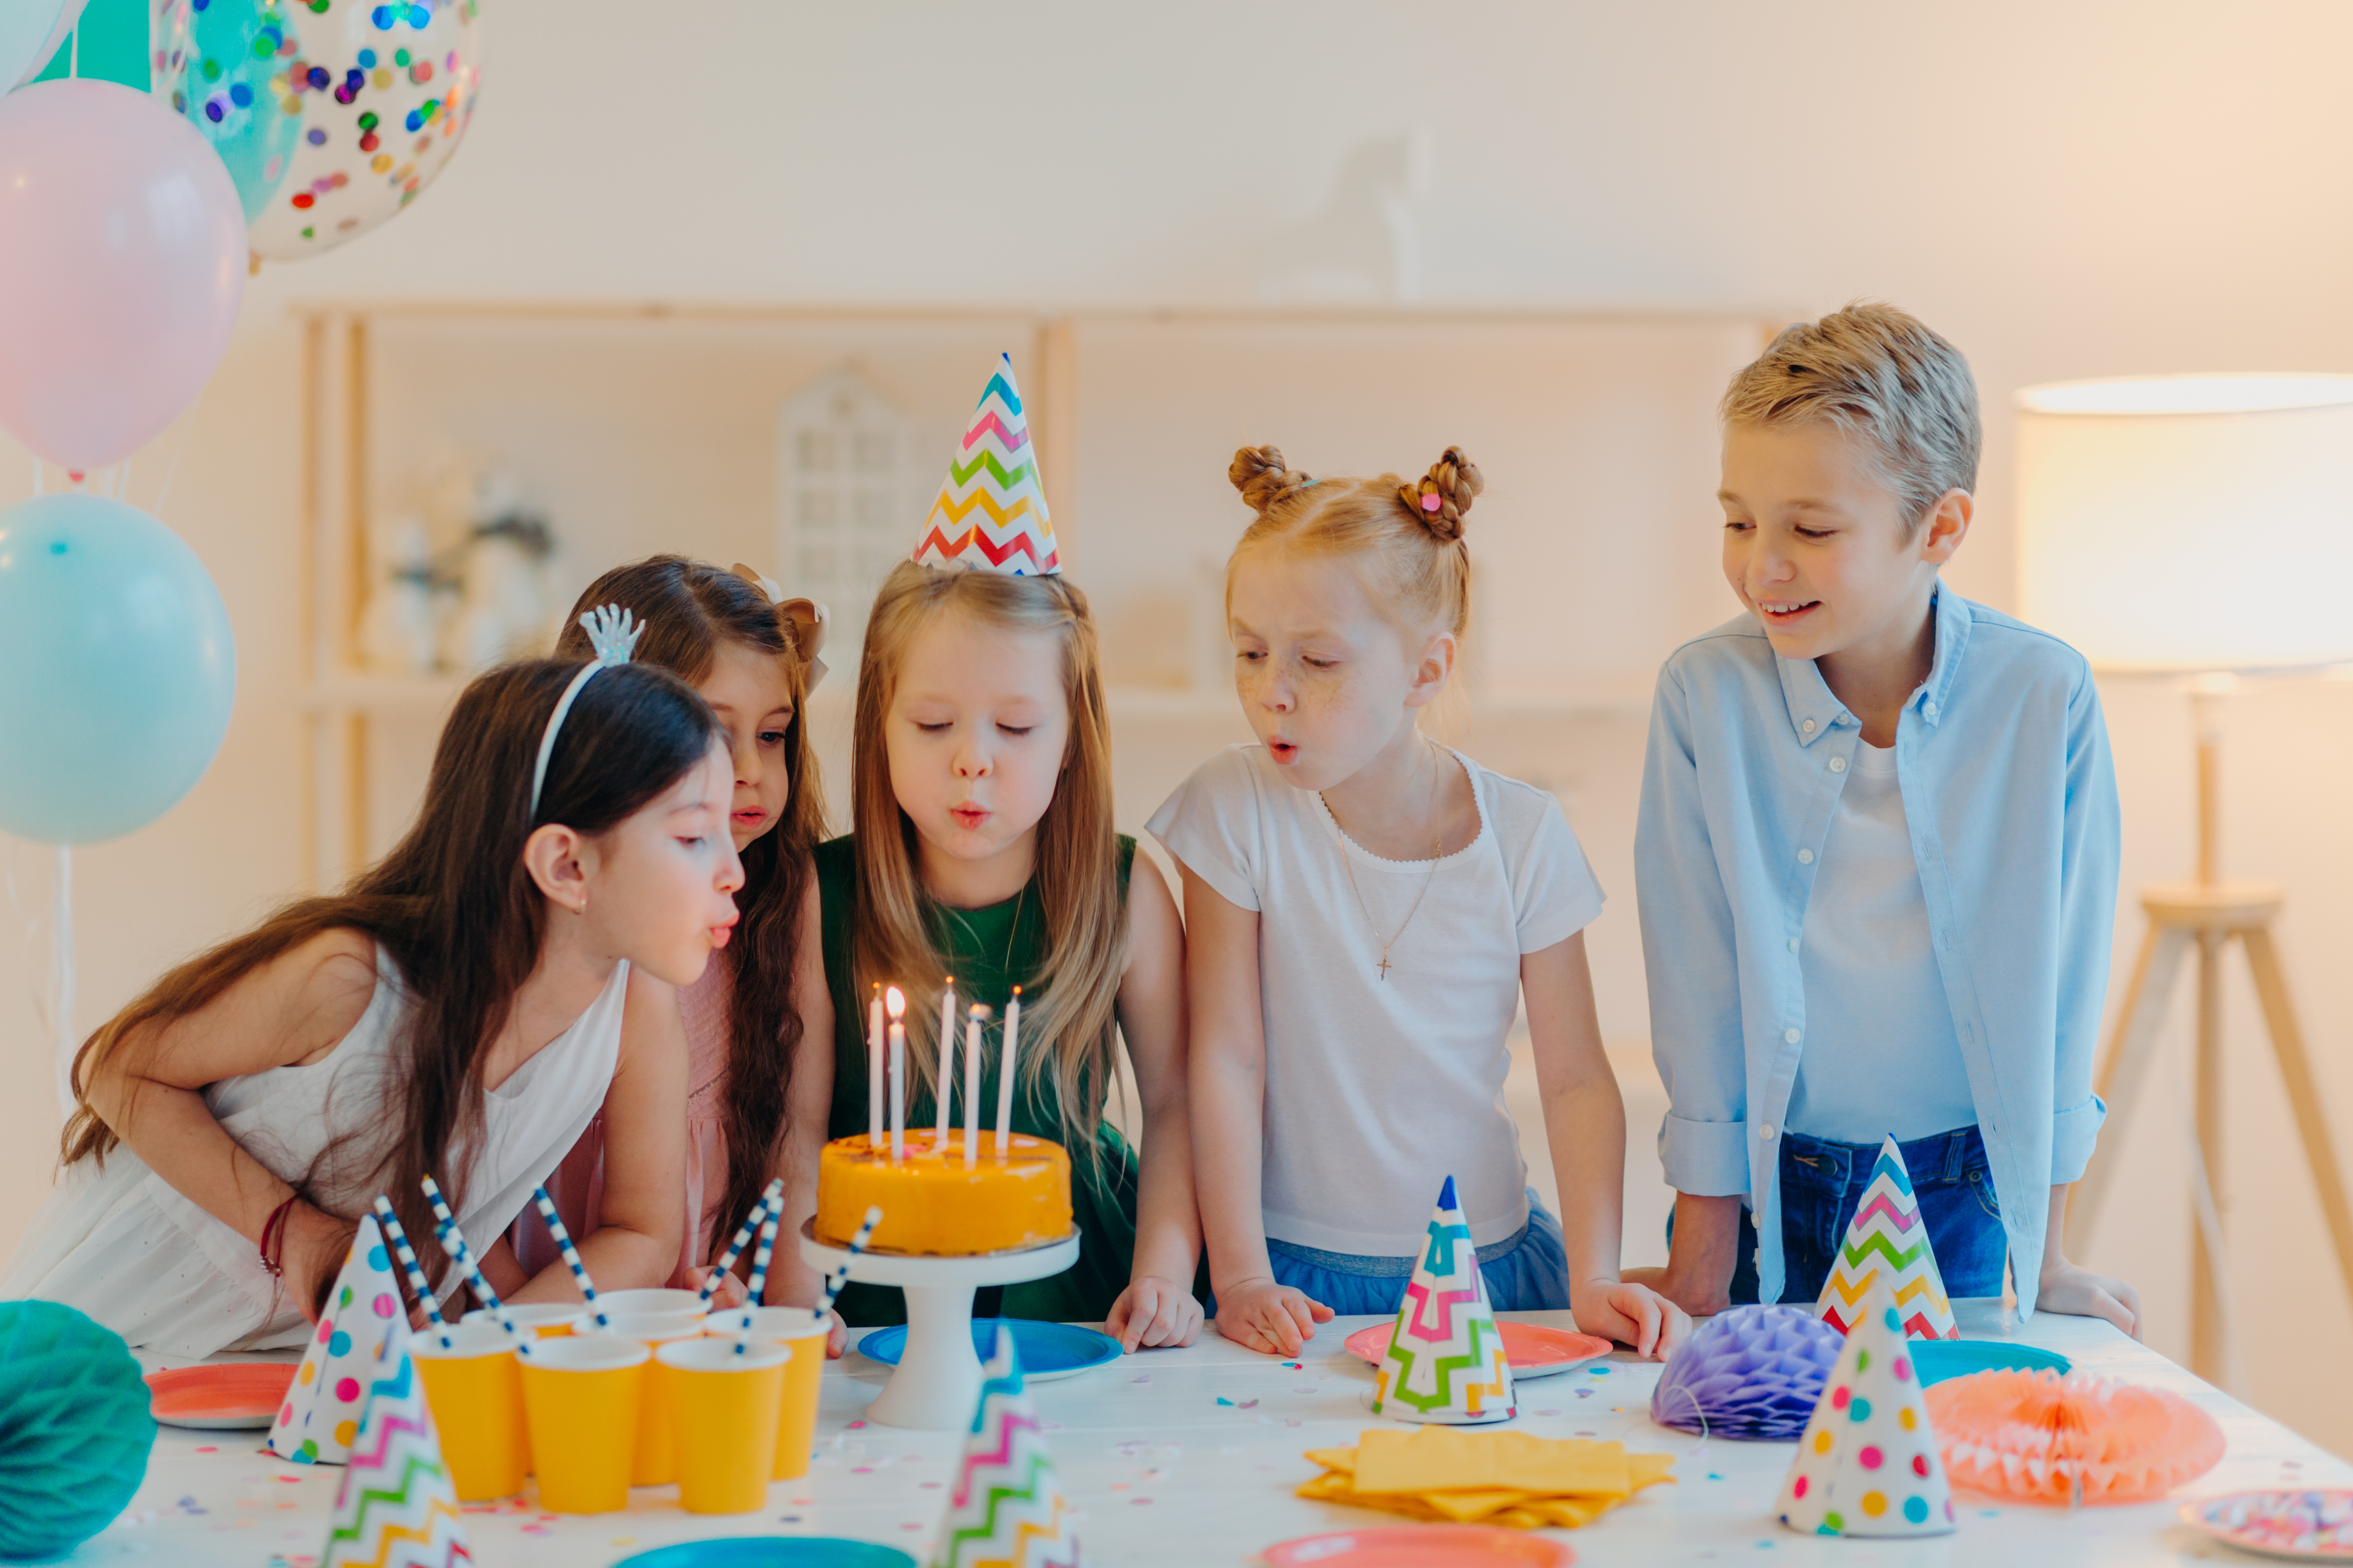 Small kids celebrate birthday party, blow candles on cake, gather at festive table